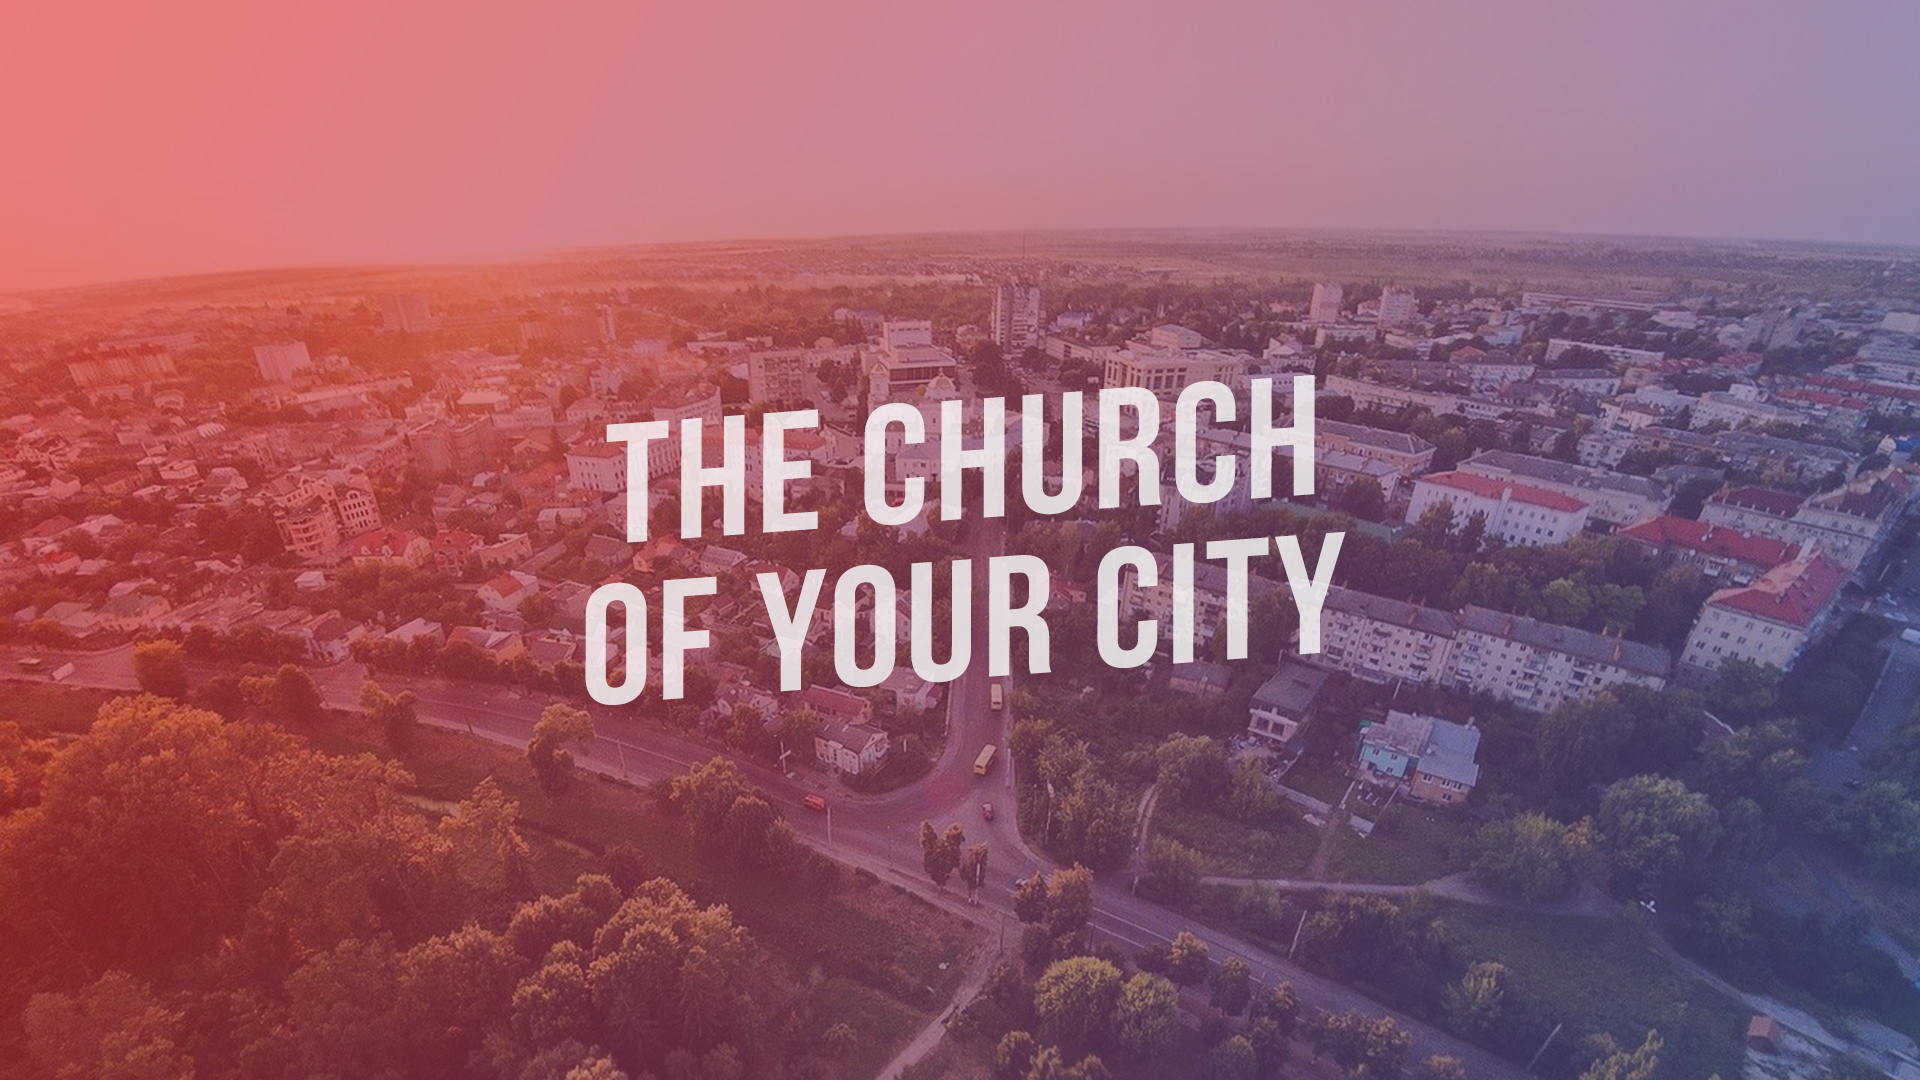 CHURCH OF YOUR CITY